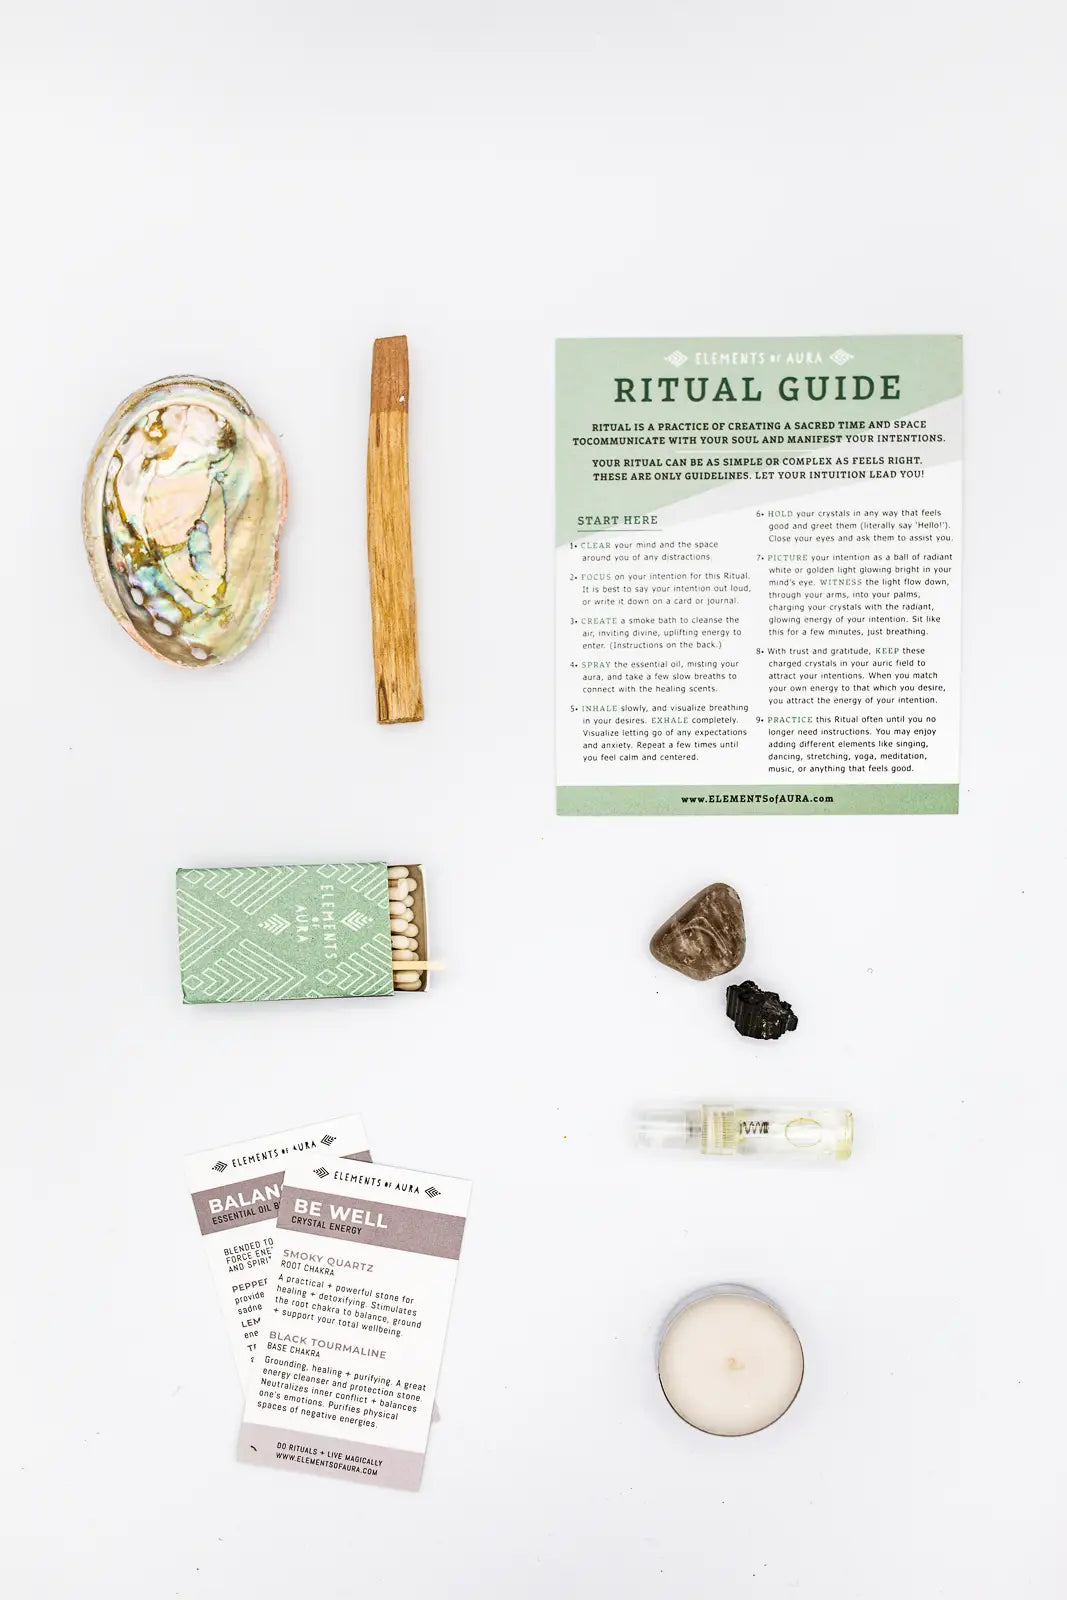 Be Well Ritual Kit - Spellbound